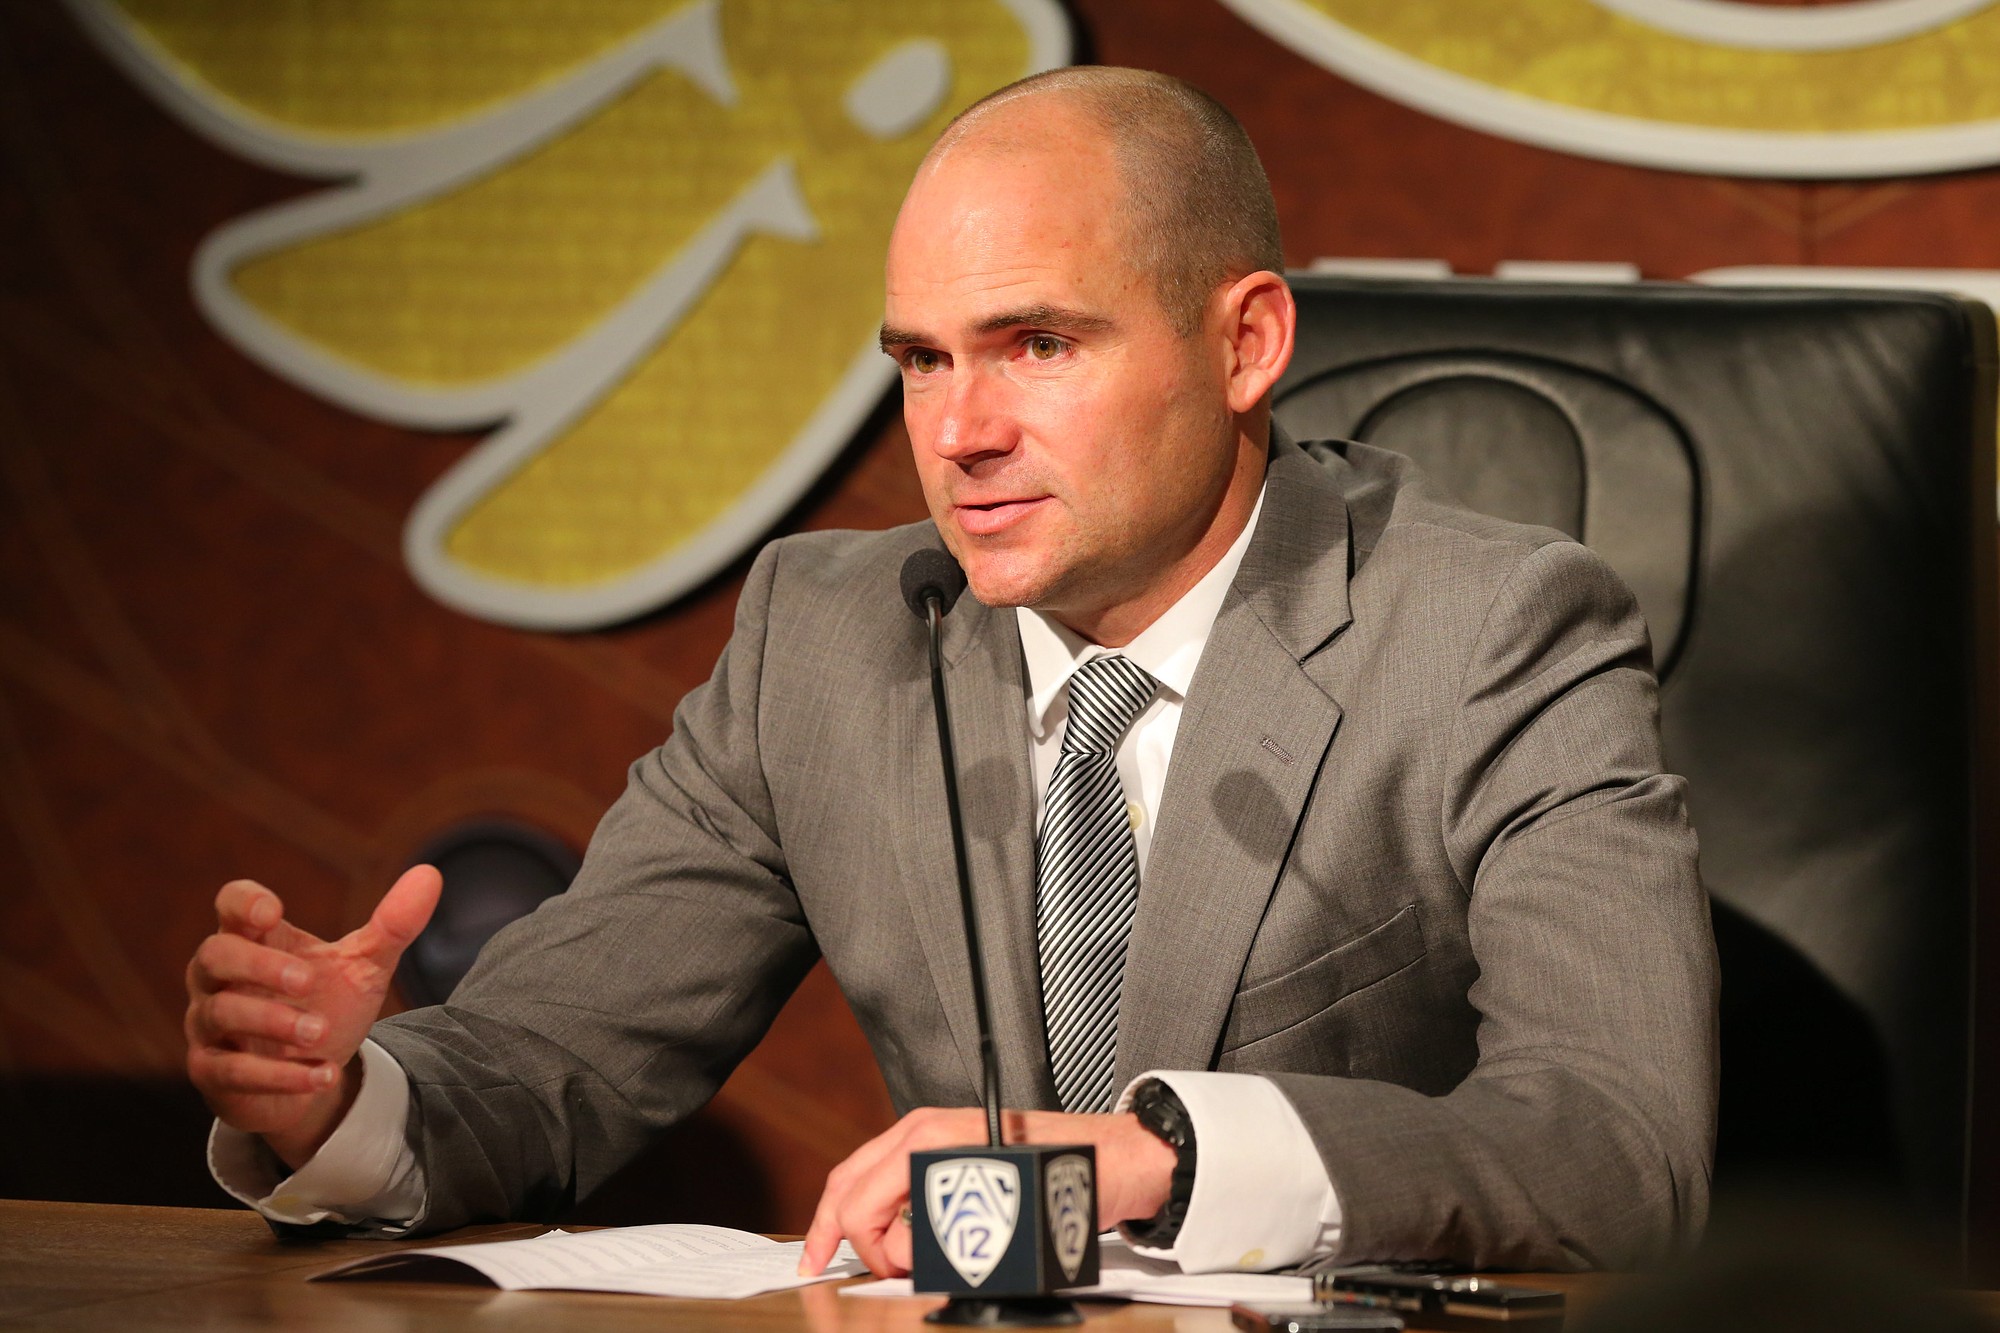 University of Oregon head coach Mark Helfrich talks with the media about the 2015 recruiting class inside the Hatfield-Dowlin Complex in Eugene, Ore., Wednesday, Feb. 4, 2015.